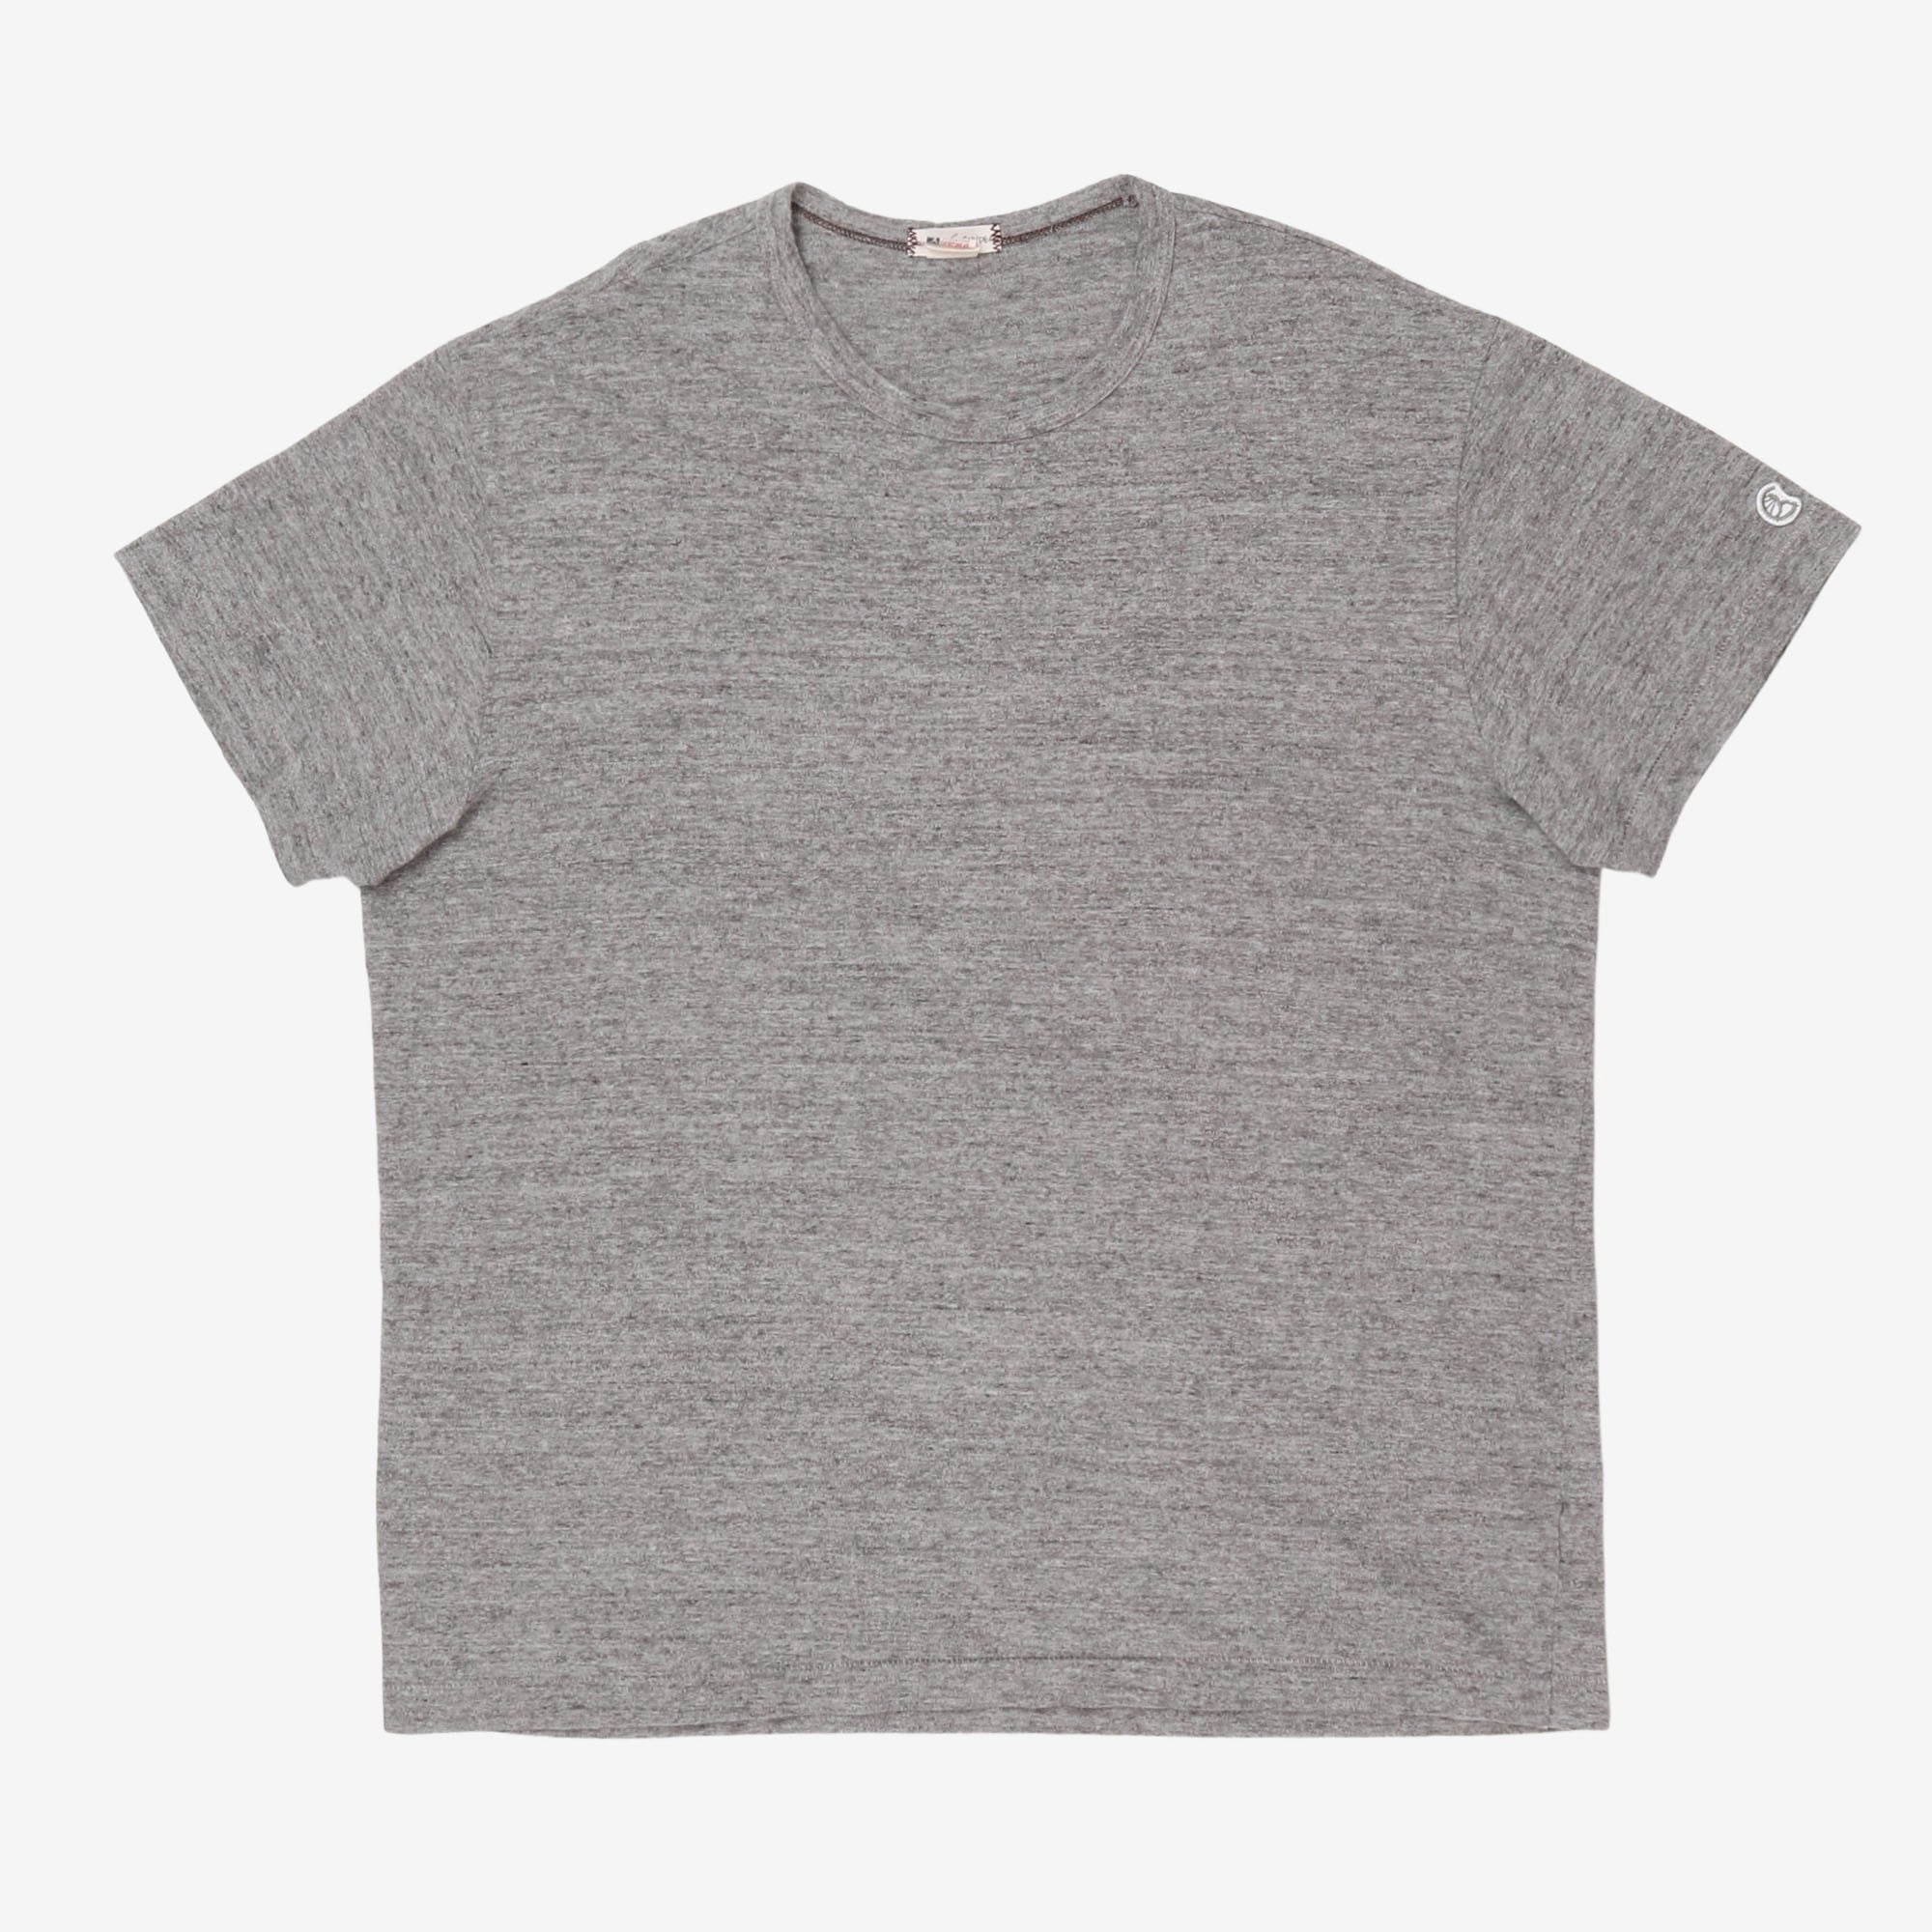 Todd Snyder Athletic Tee